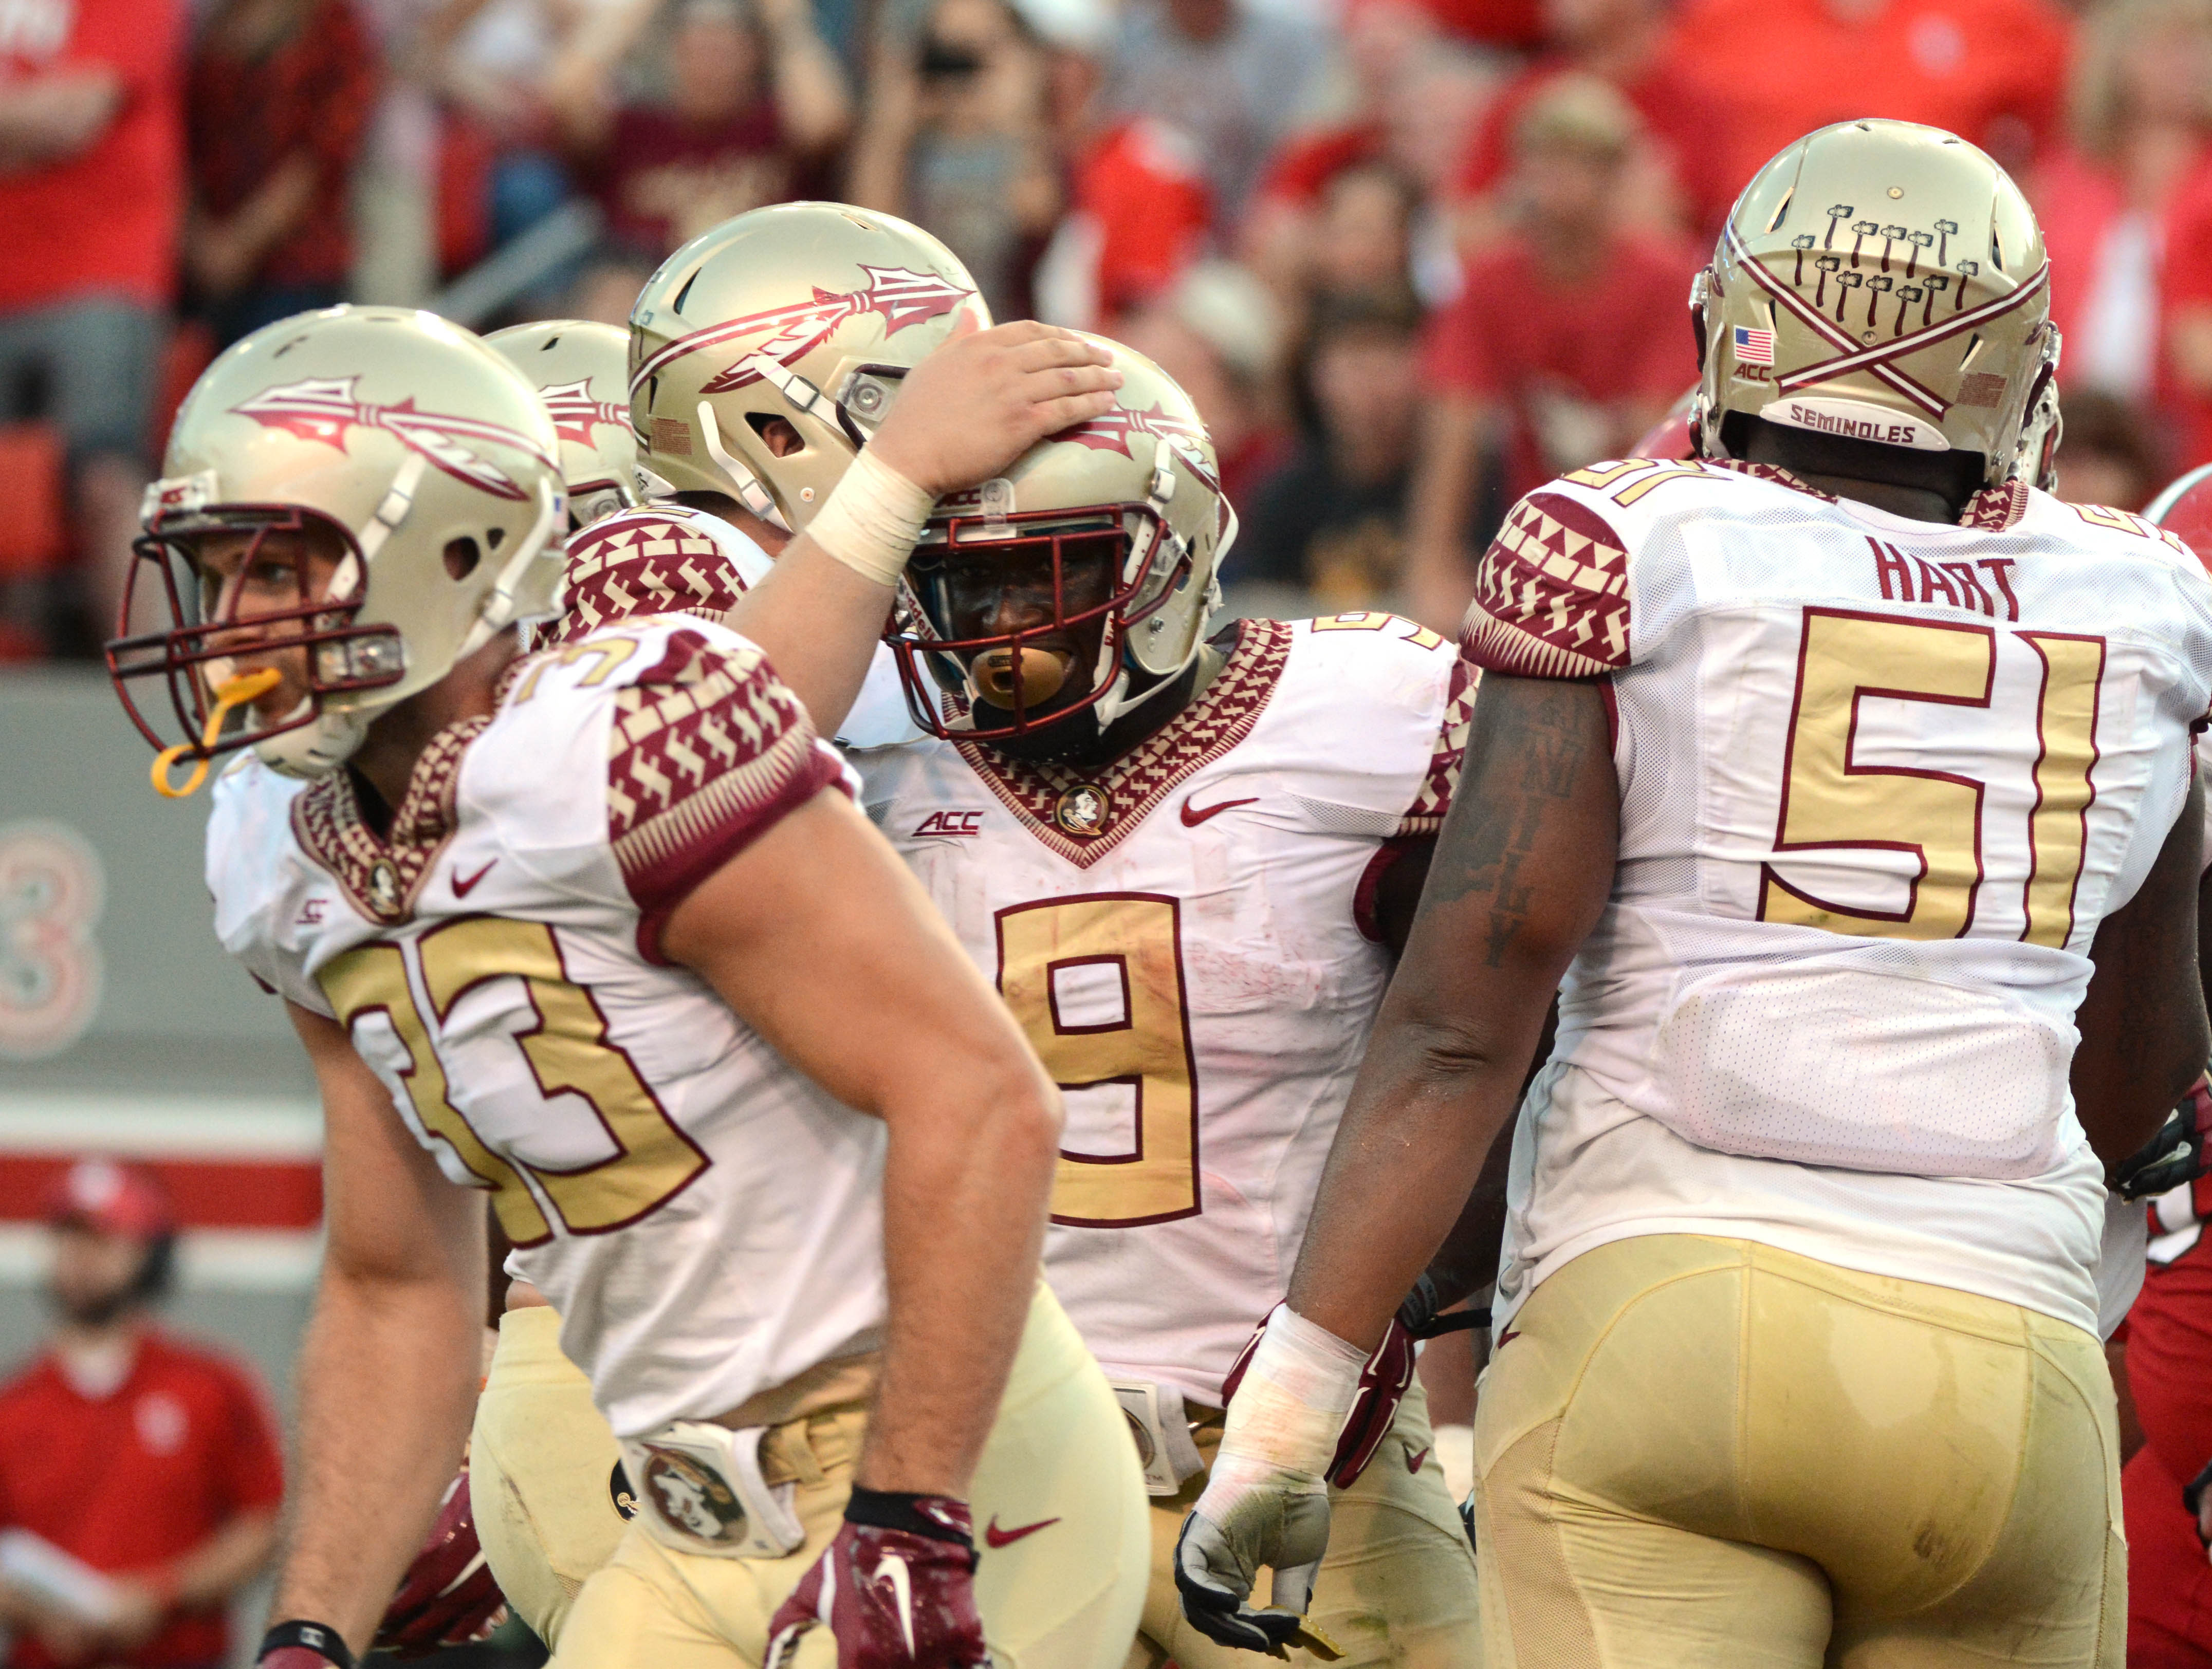 Karlos Williams (9) scored for Florida State in its rally against N.C. State  (Rob Kinnan, USA TODAY Sports)